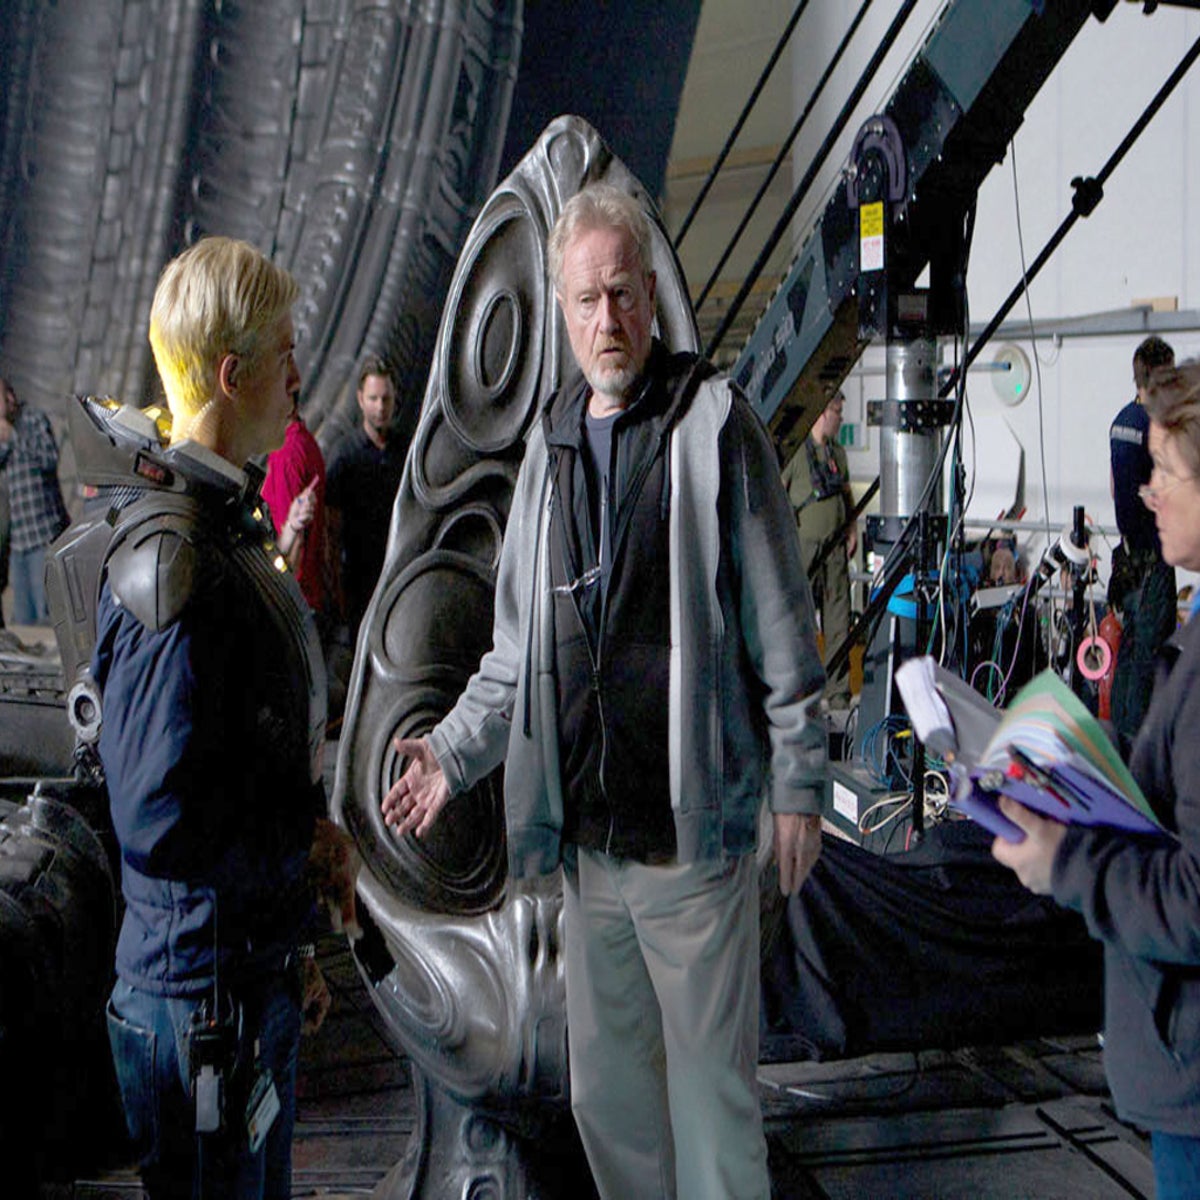 Ridley Scott Won't Direct A Comic Book Movie Because They Are Hard